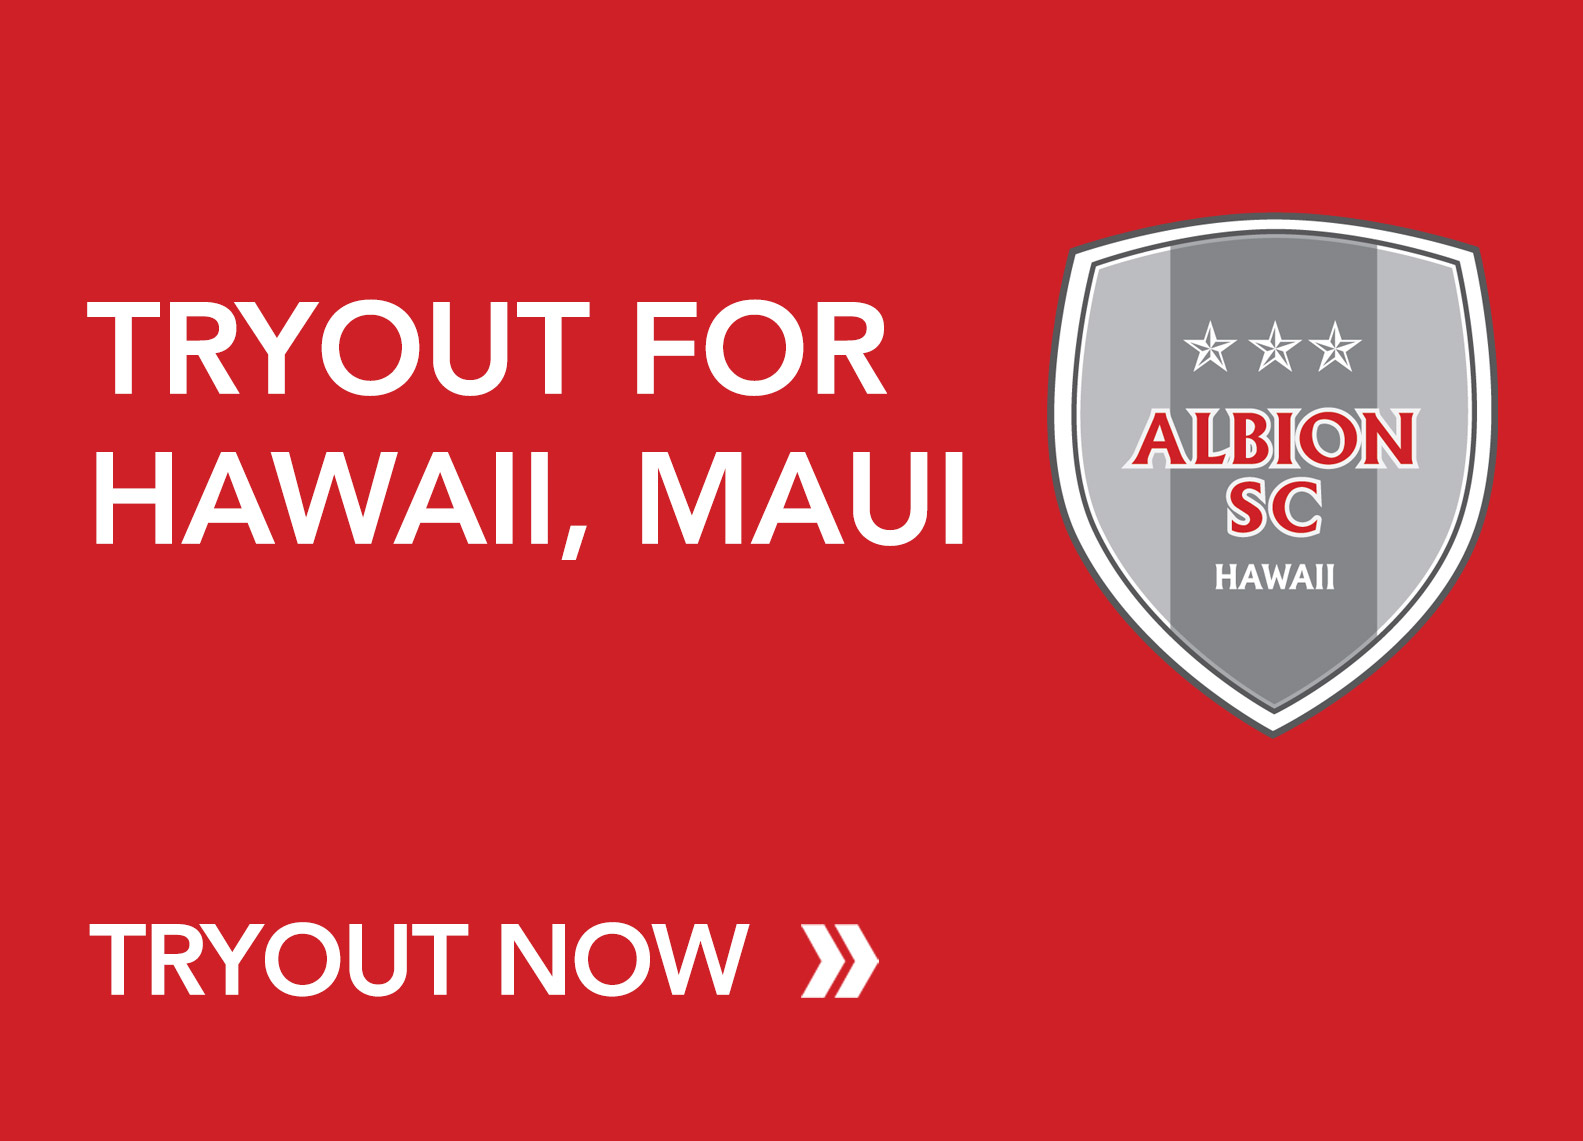 Register for ALBION SC Hawaii Today!